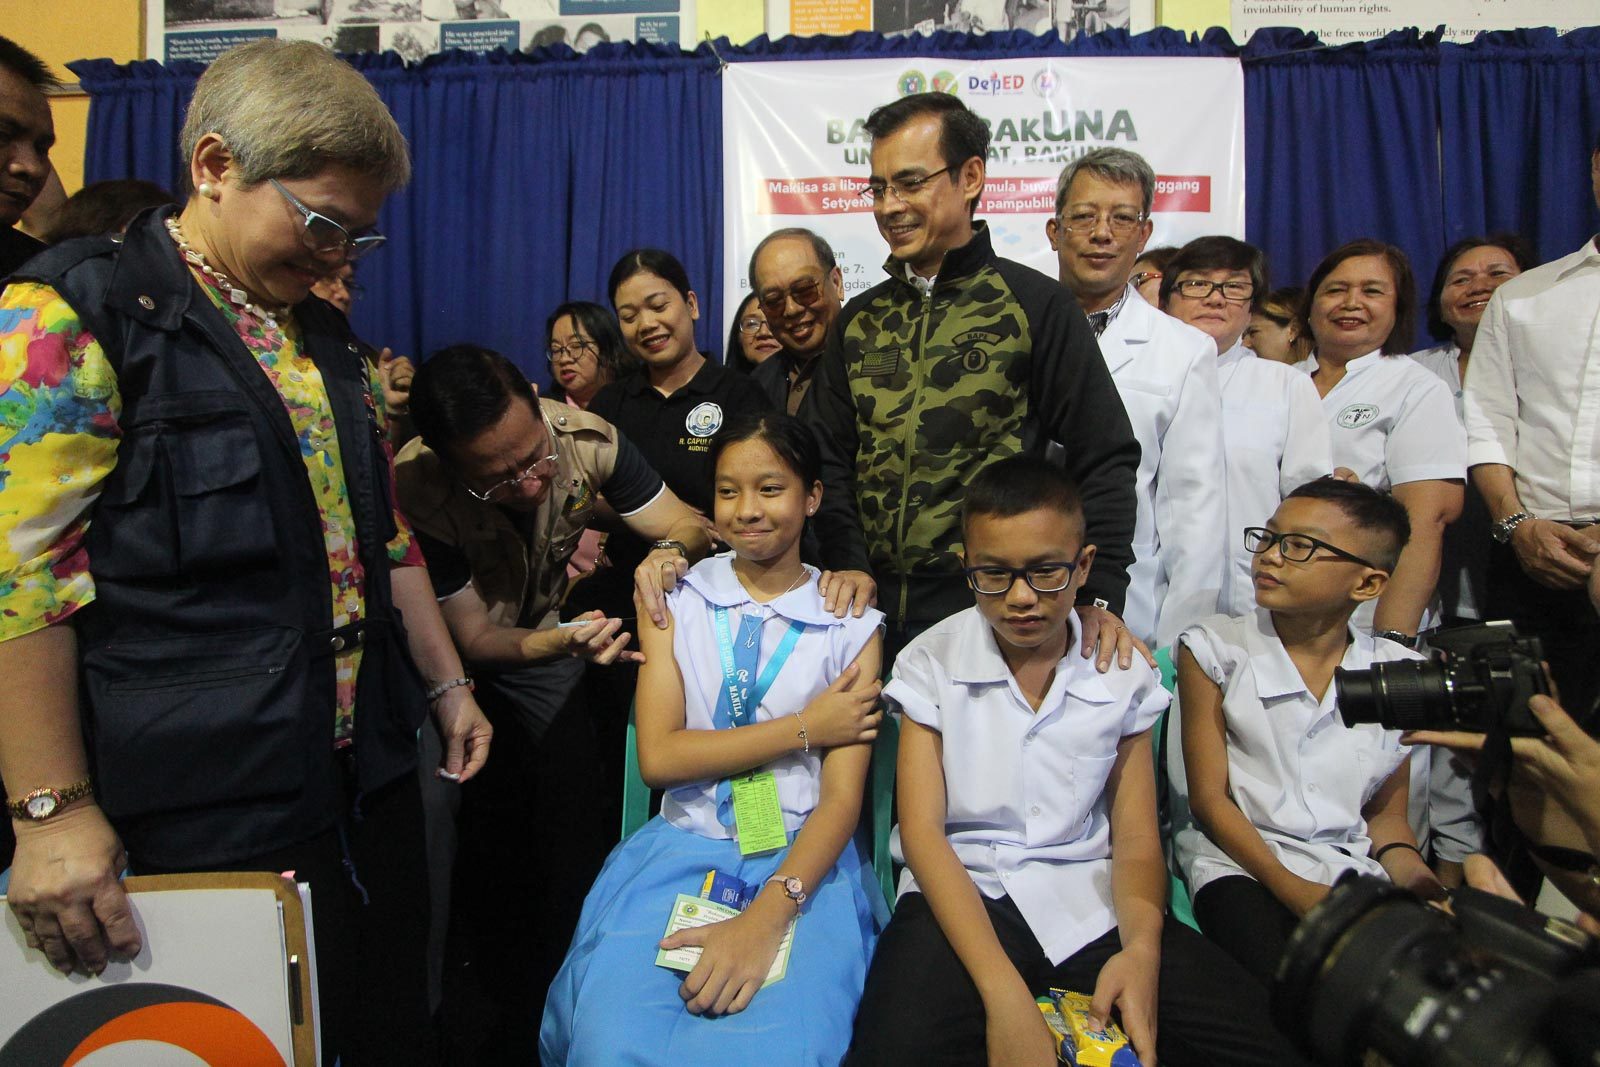 ADMINSTERING SHOTS. Manila Mayor Isko Moreno joins Health secretary Francisco Duque III in administering shots of measles and diphtheria vaccines to grade 7 students of Ramon Magsaysay High School in Manila on July 16, 2019. Photo by Inoue Jaena/Rappler  